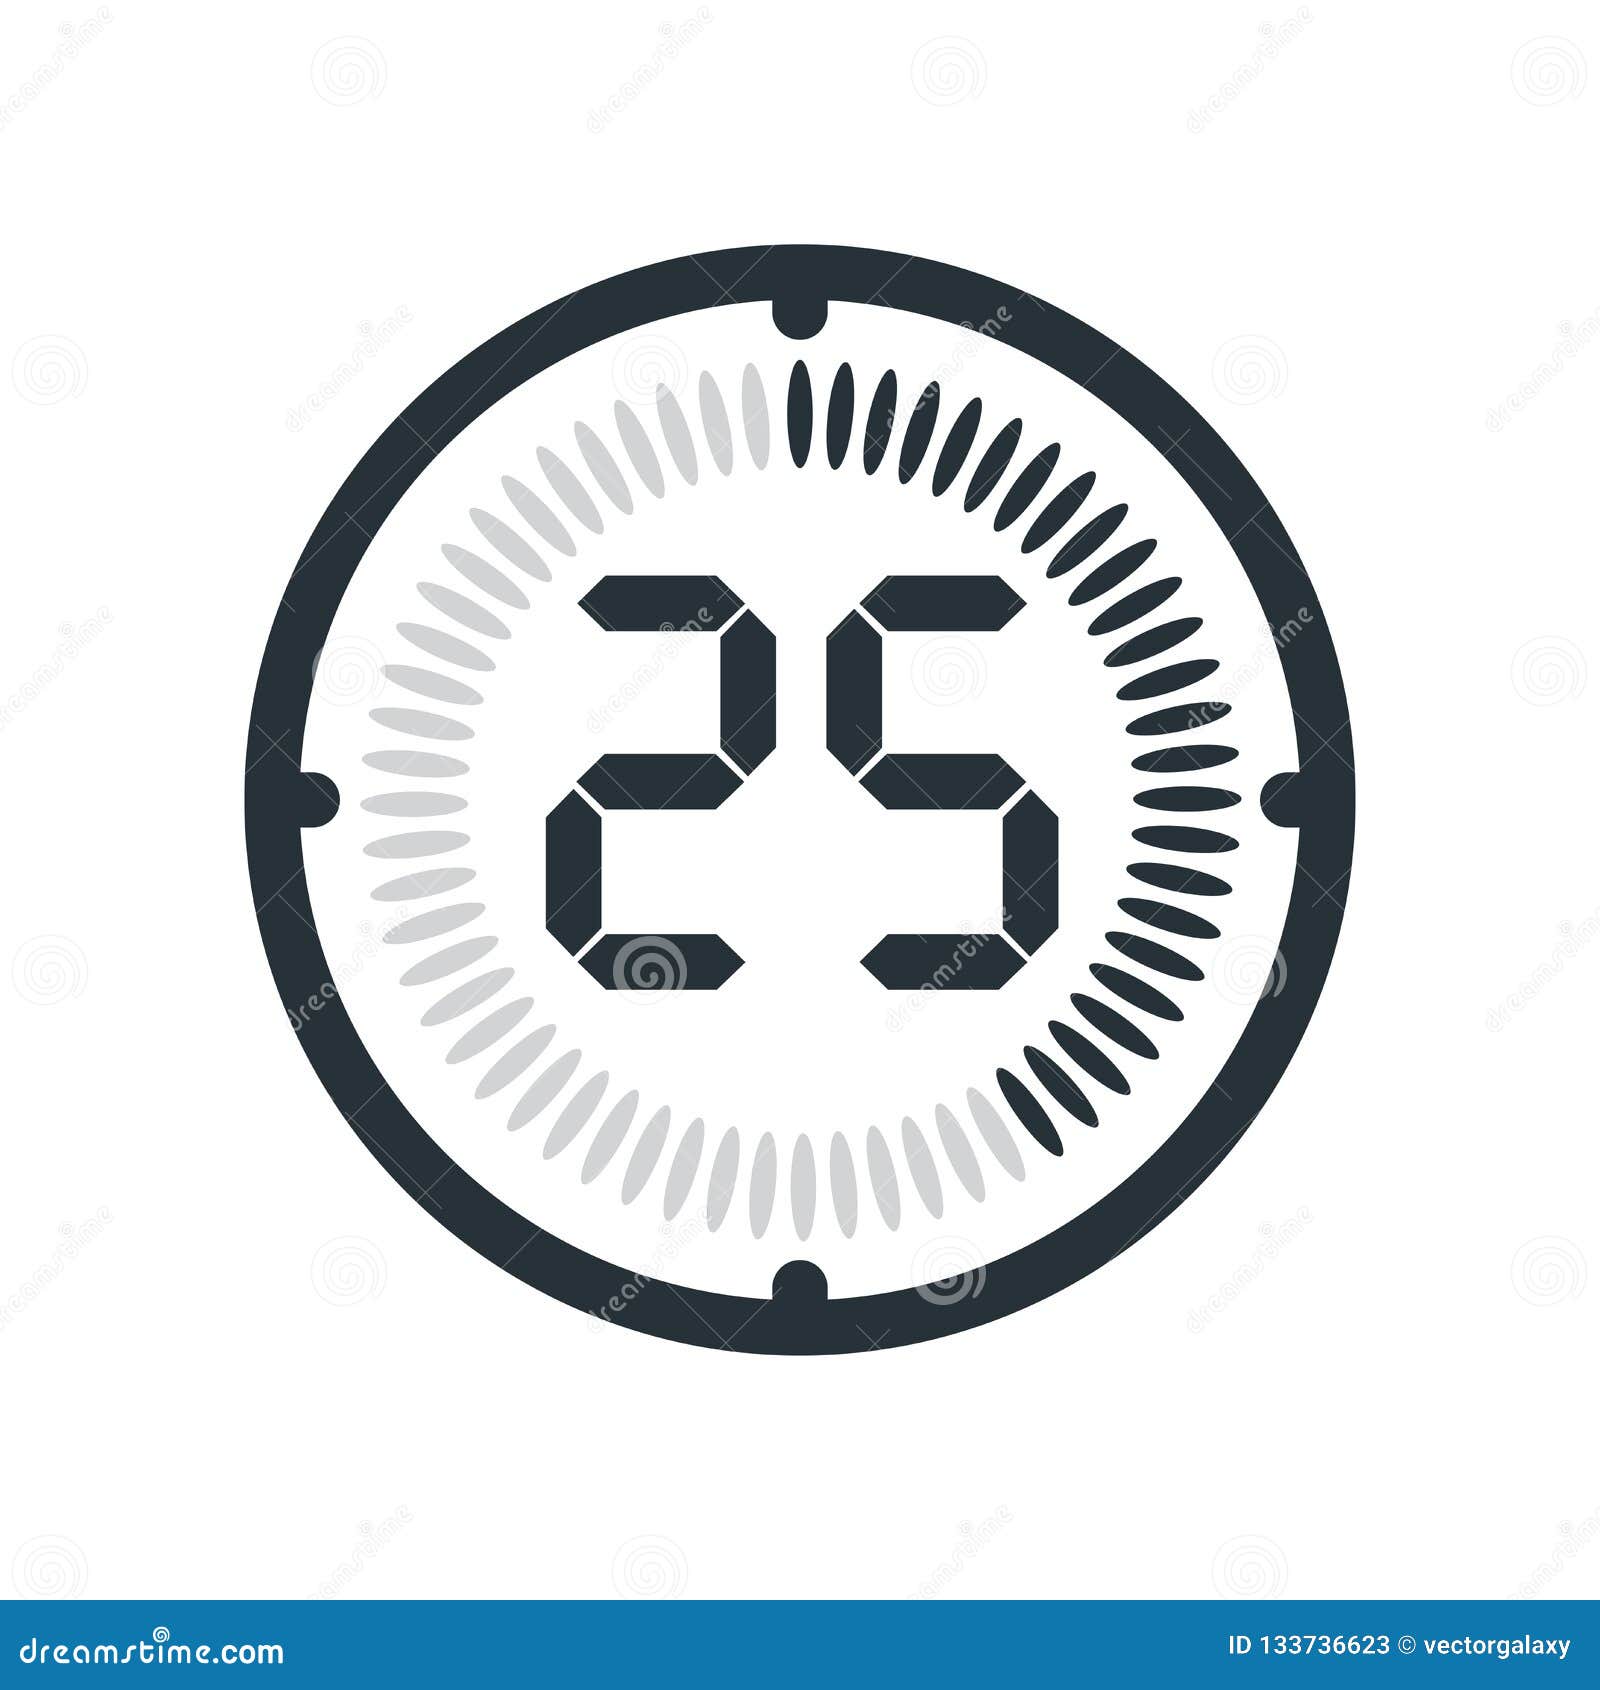 Premium Vector  Clock icon with 25 minute time interval countdown timer or  stopwatch symbol